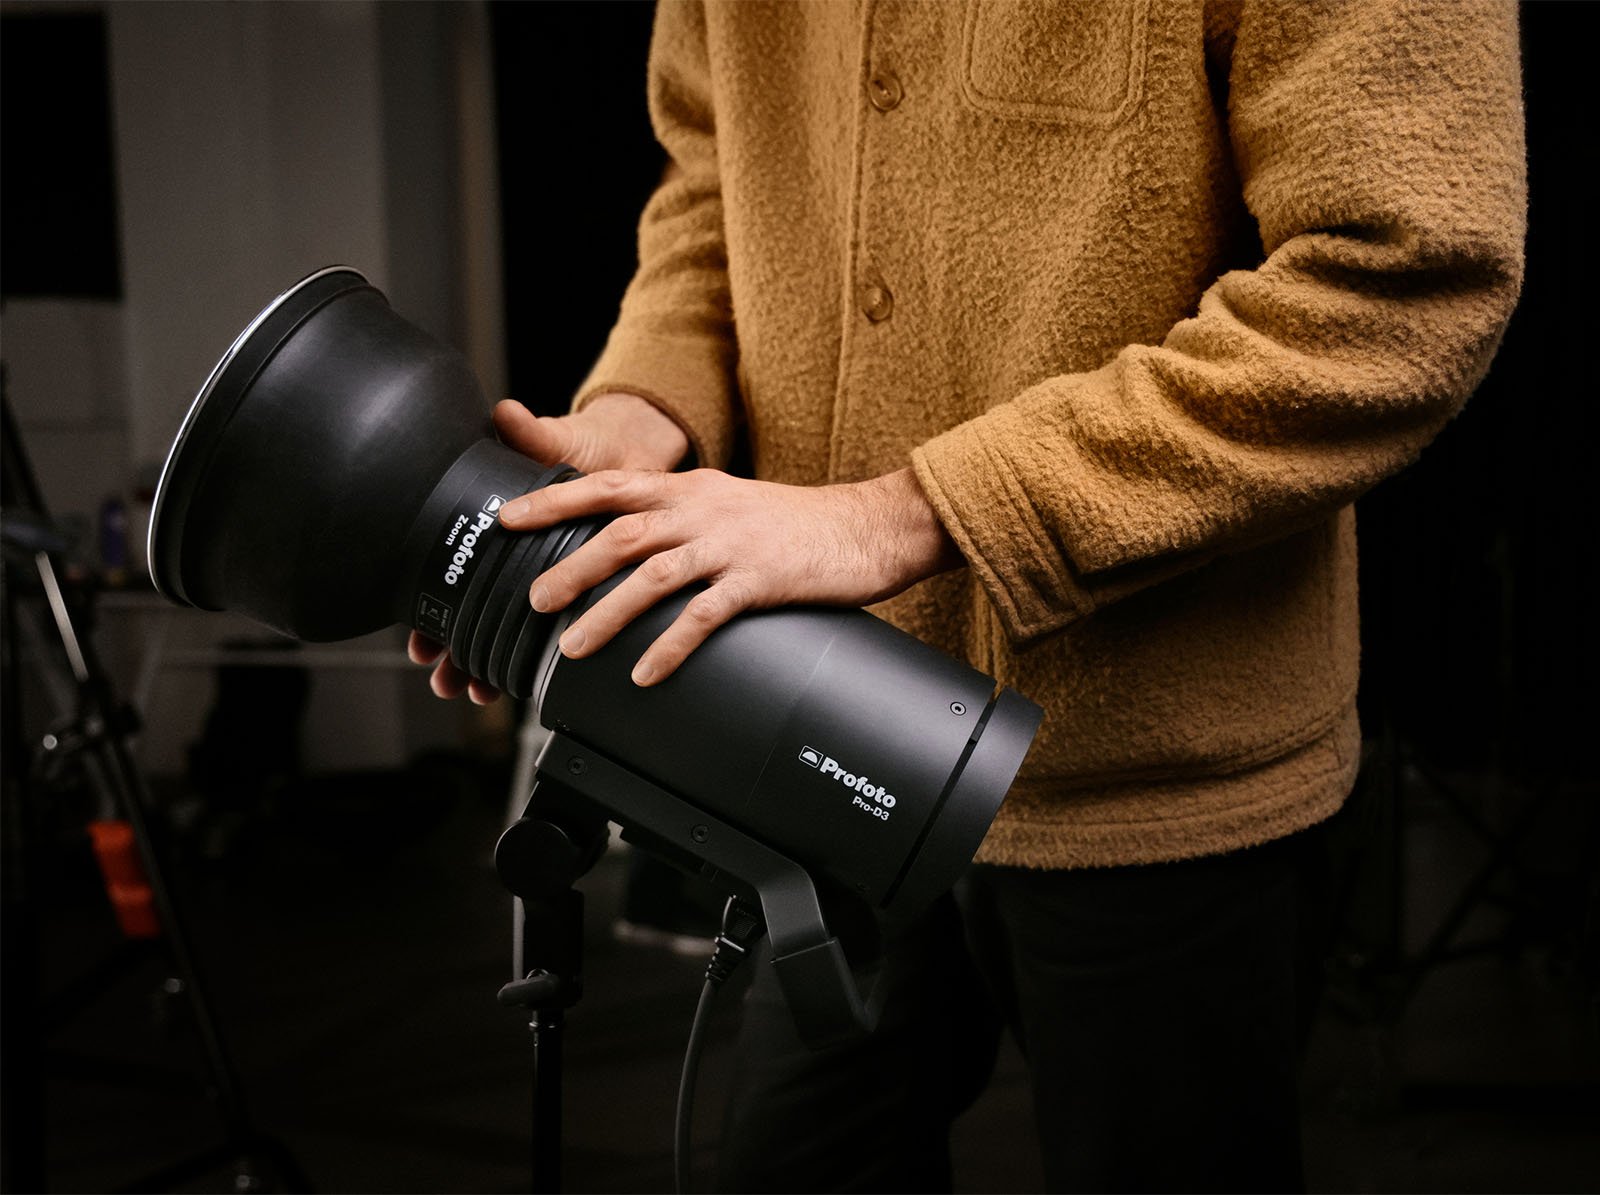 A person in a beige cardigan adjusts a professional studio light, focusing on its angling. details are visible in a dimly lit photography studio setting.